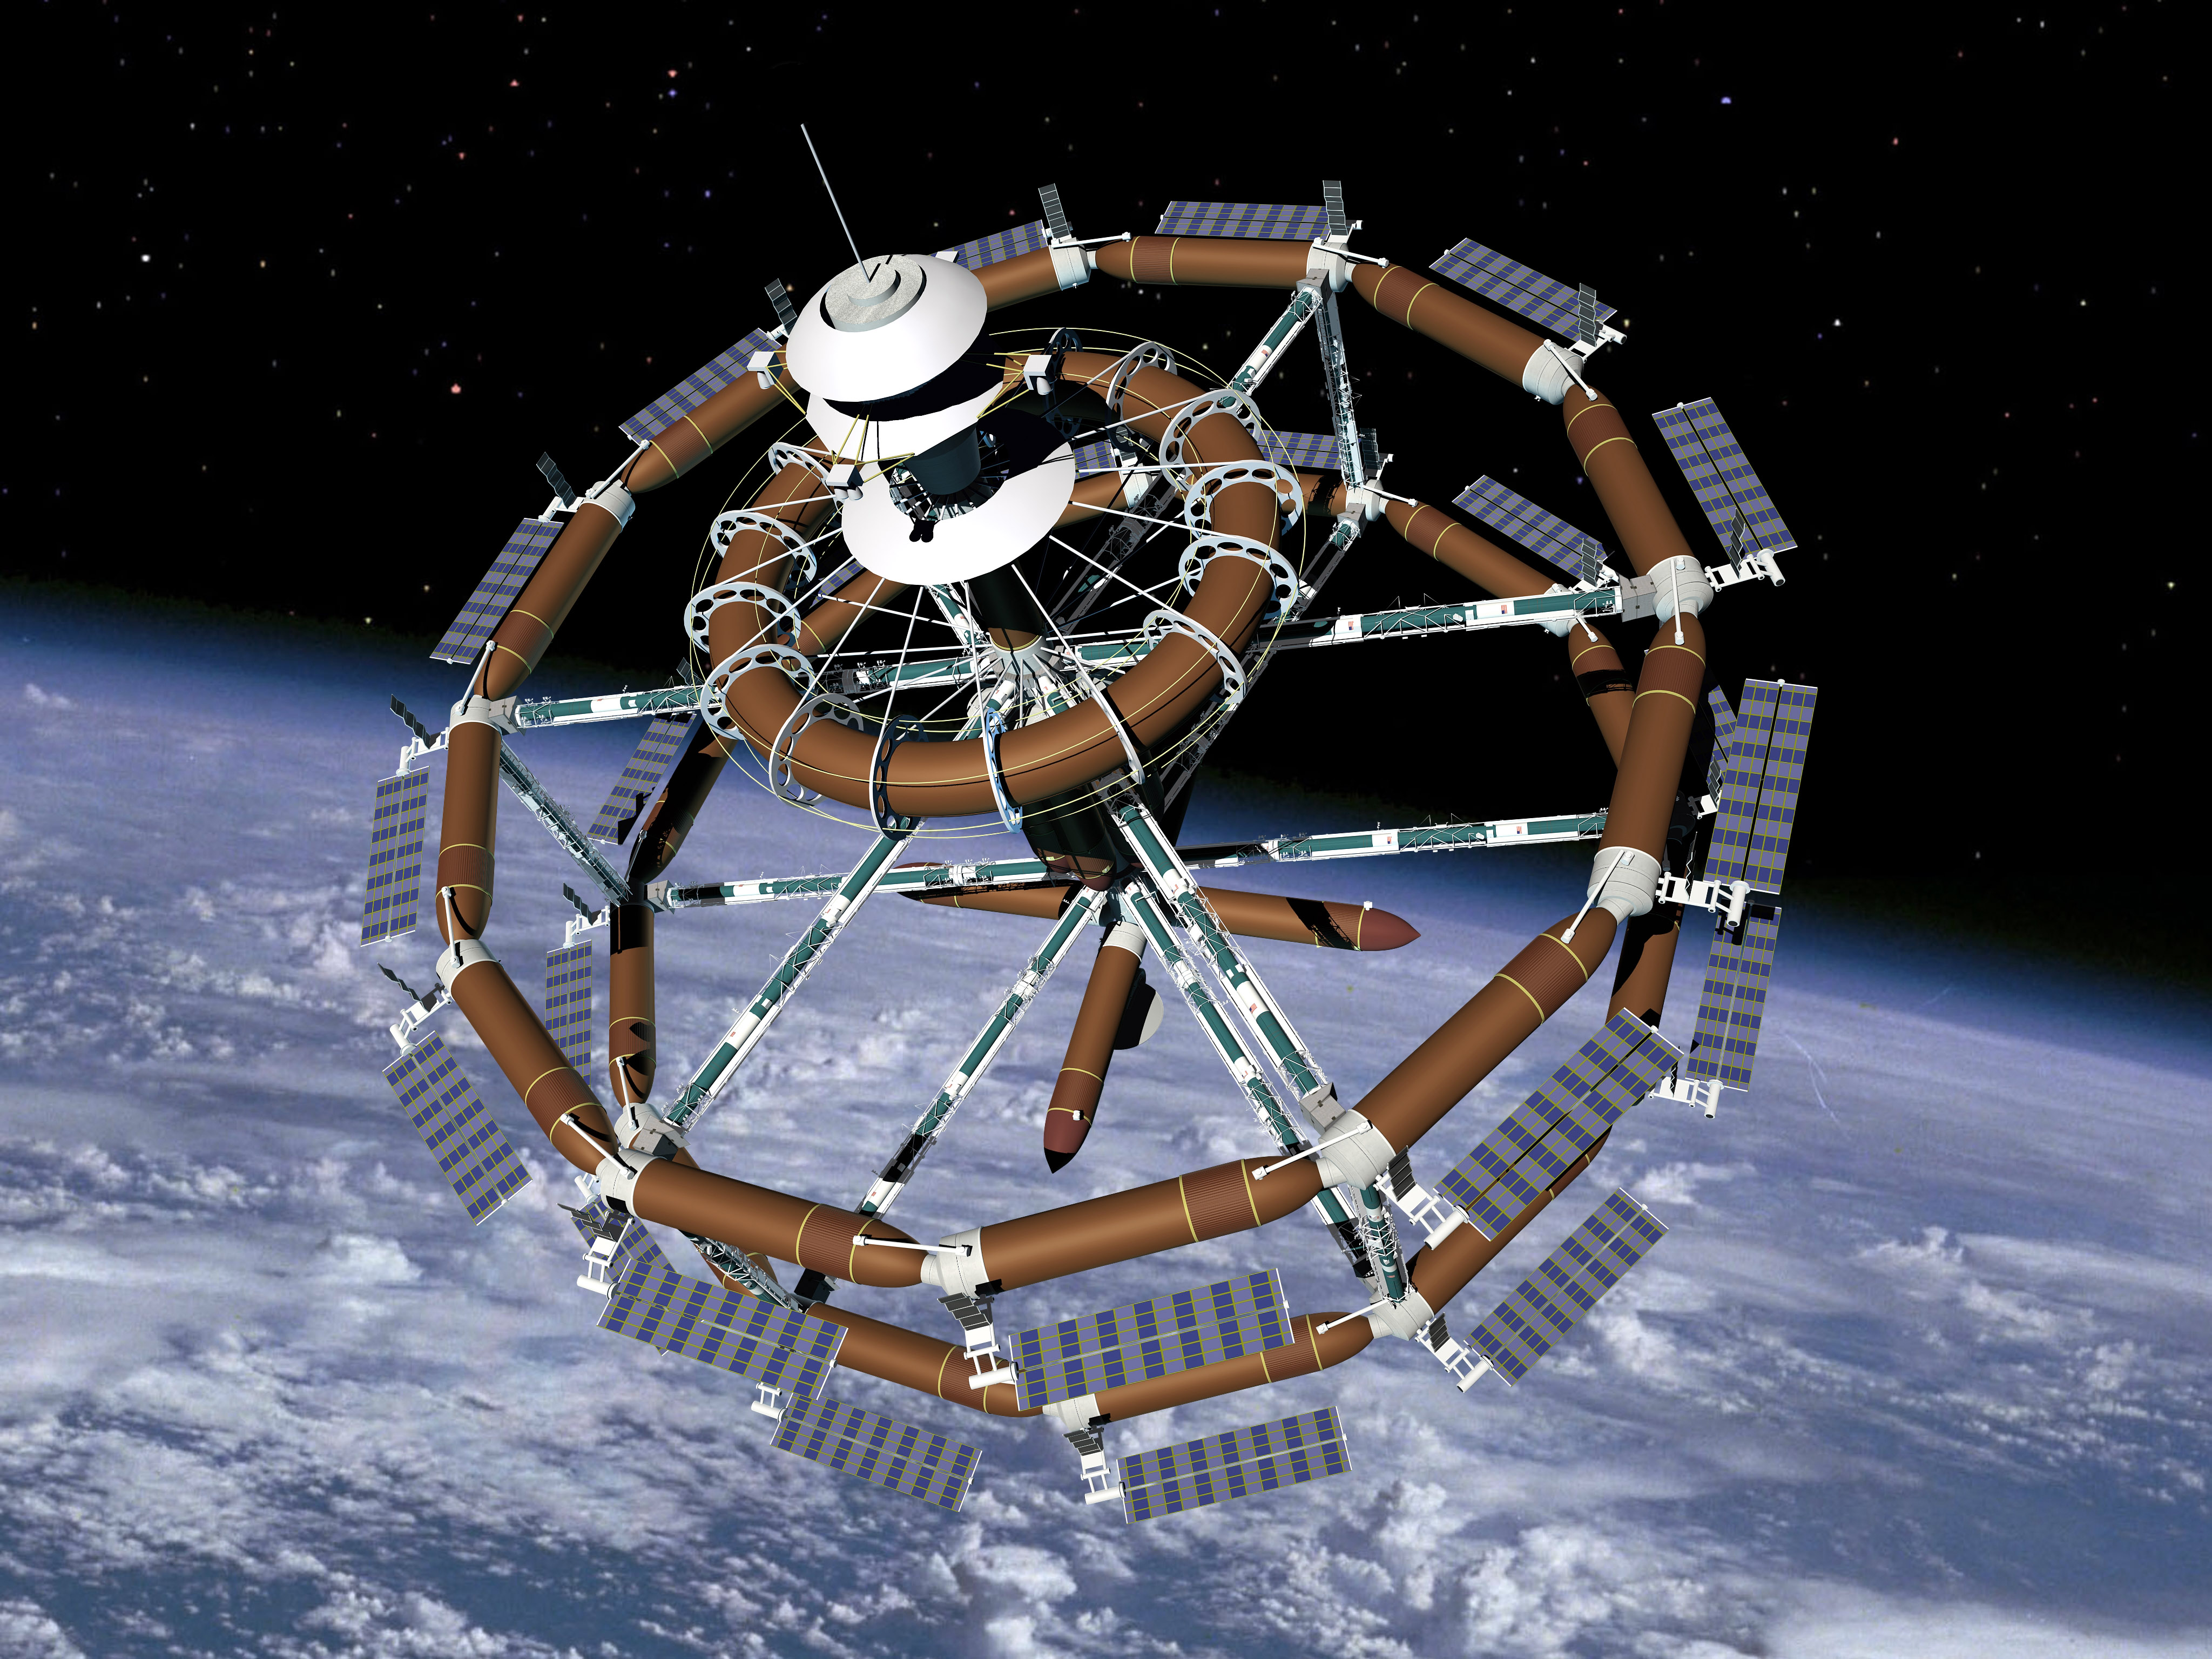 This company wants to use existing Space Shuttle technology to build a ring station for Colonization! www.SpaceIslandGroup.COM